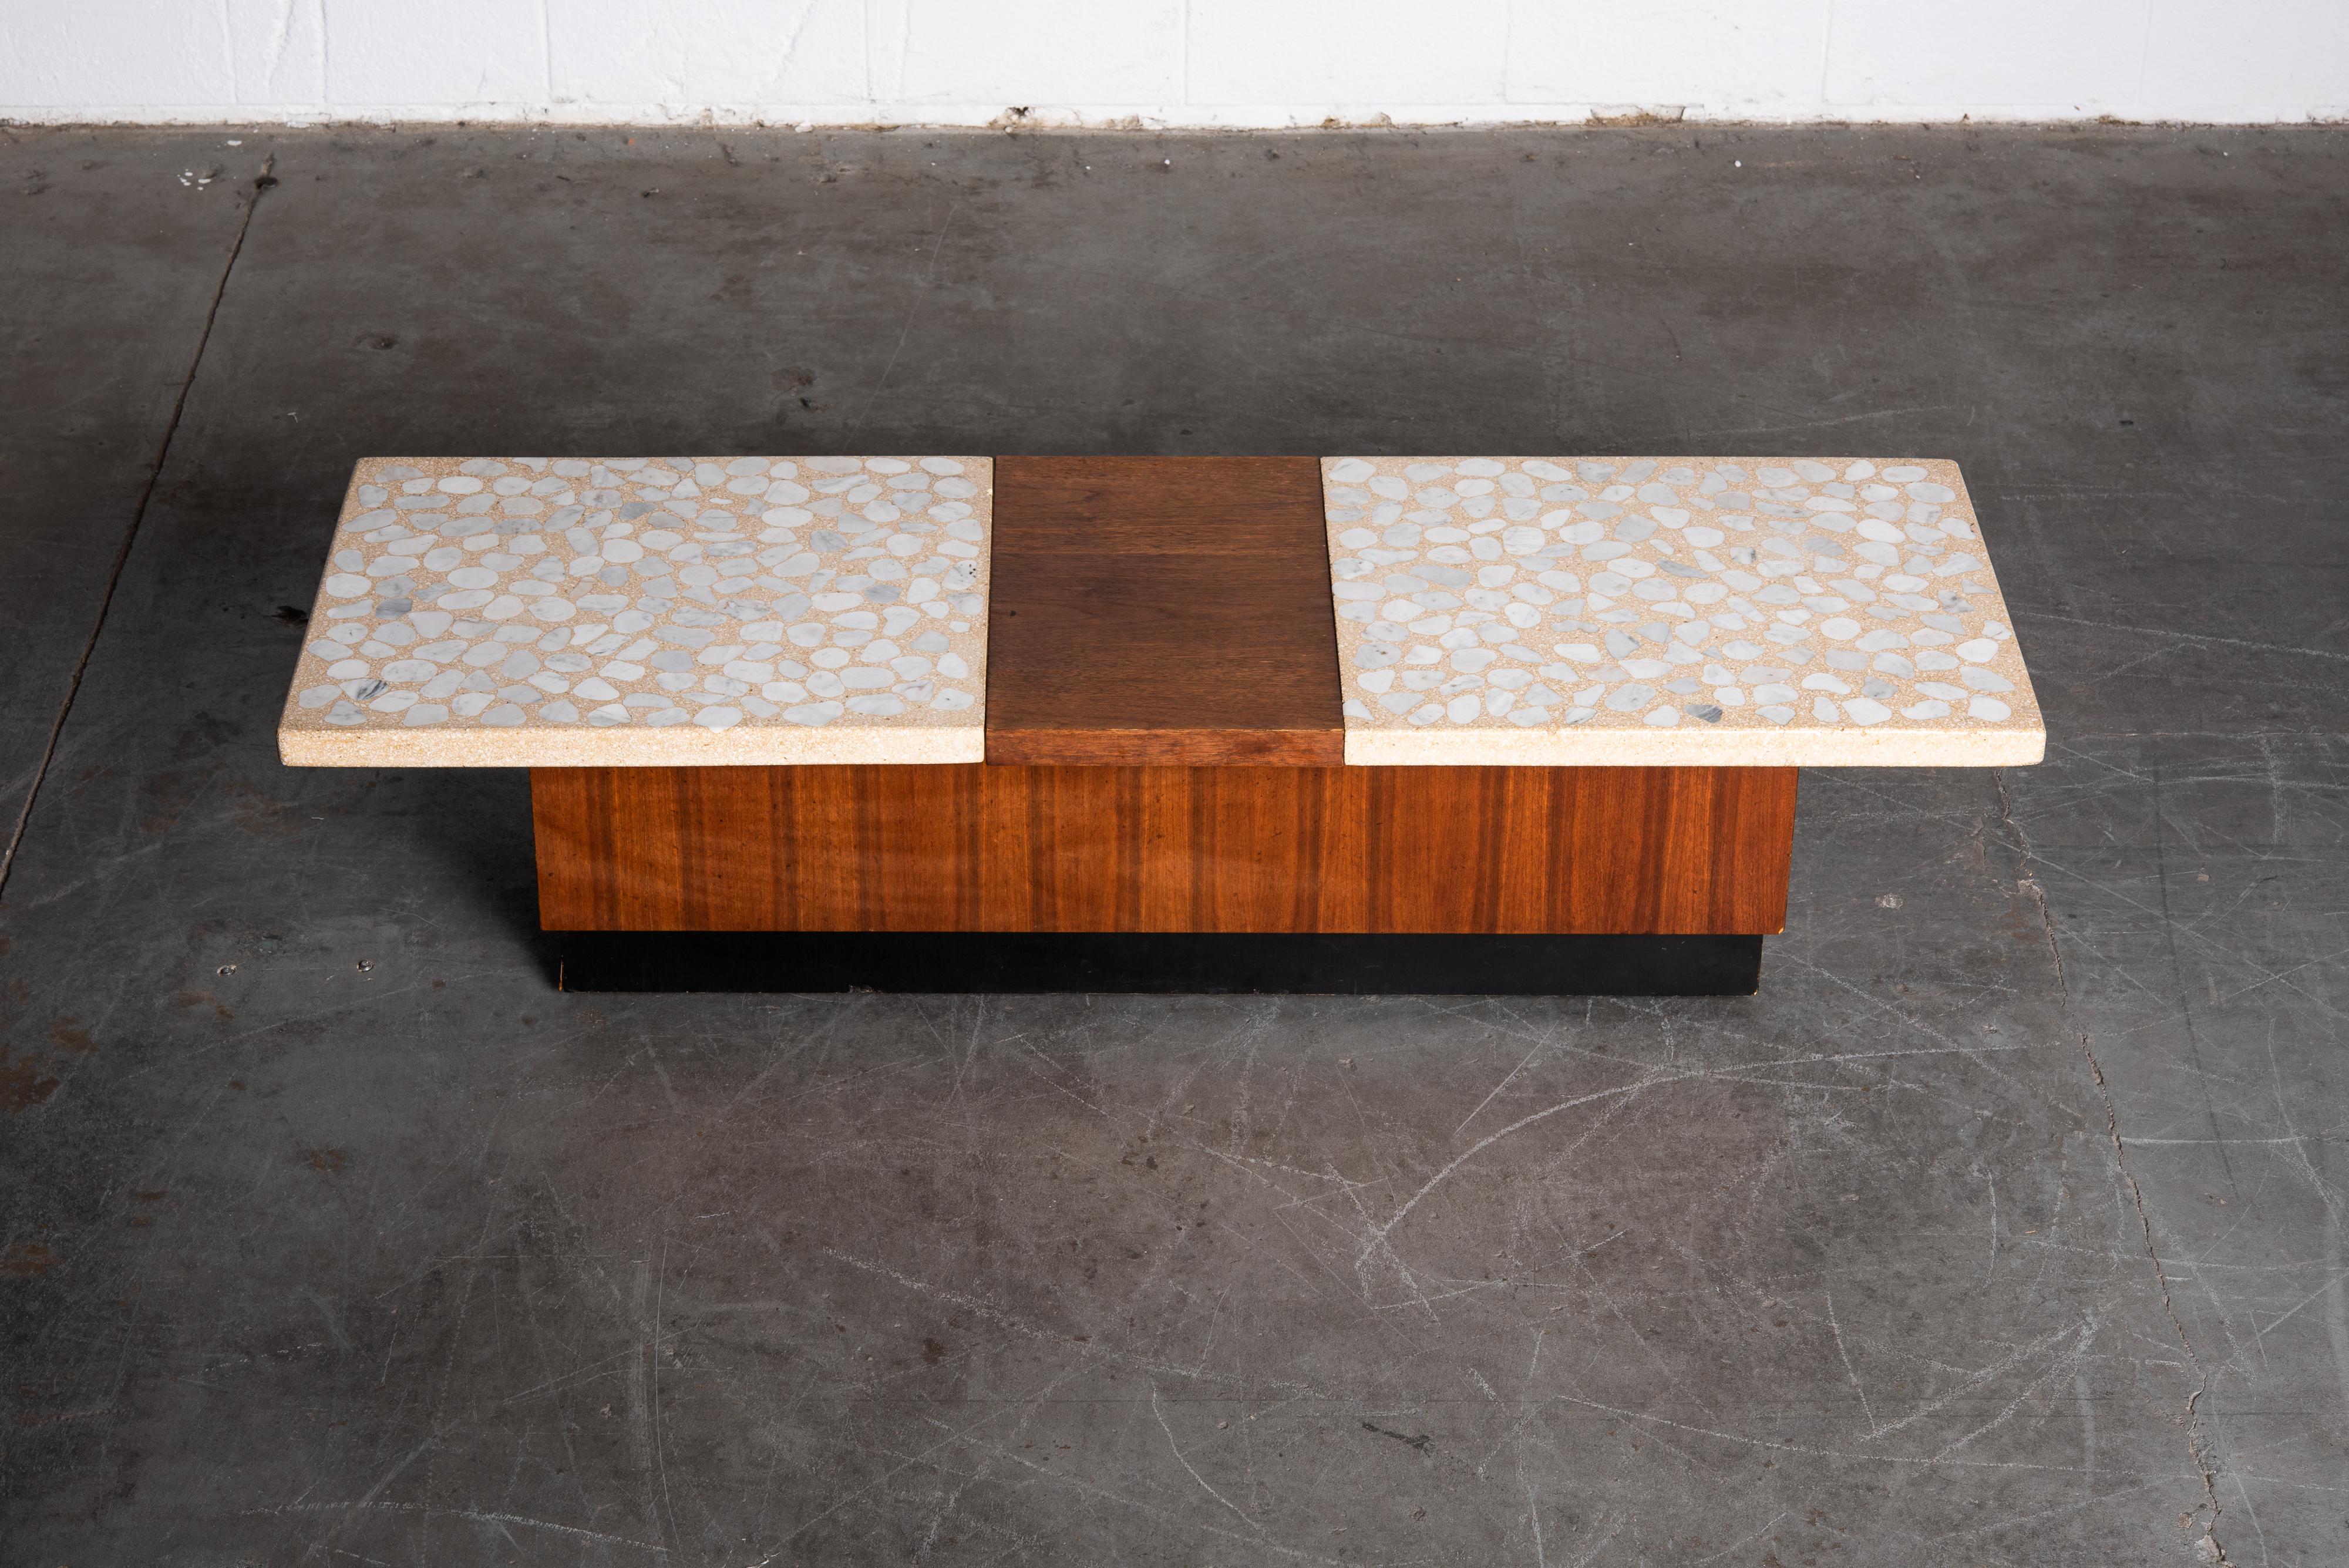 American Terrazzo and Walnut Harvey Probber Style Coffee Table or Bench, c. 1960